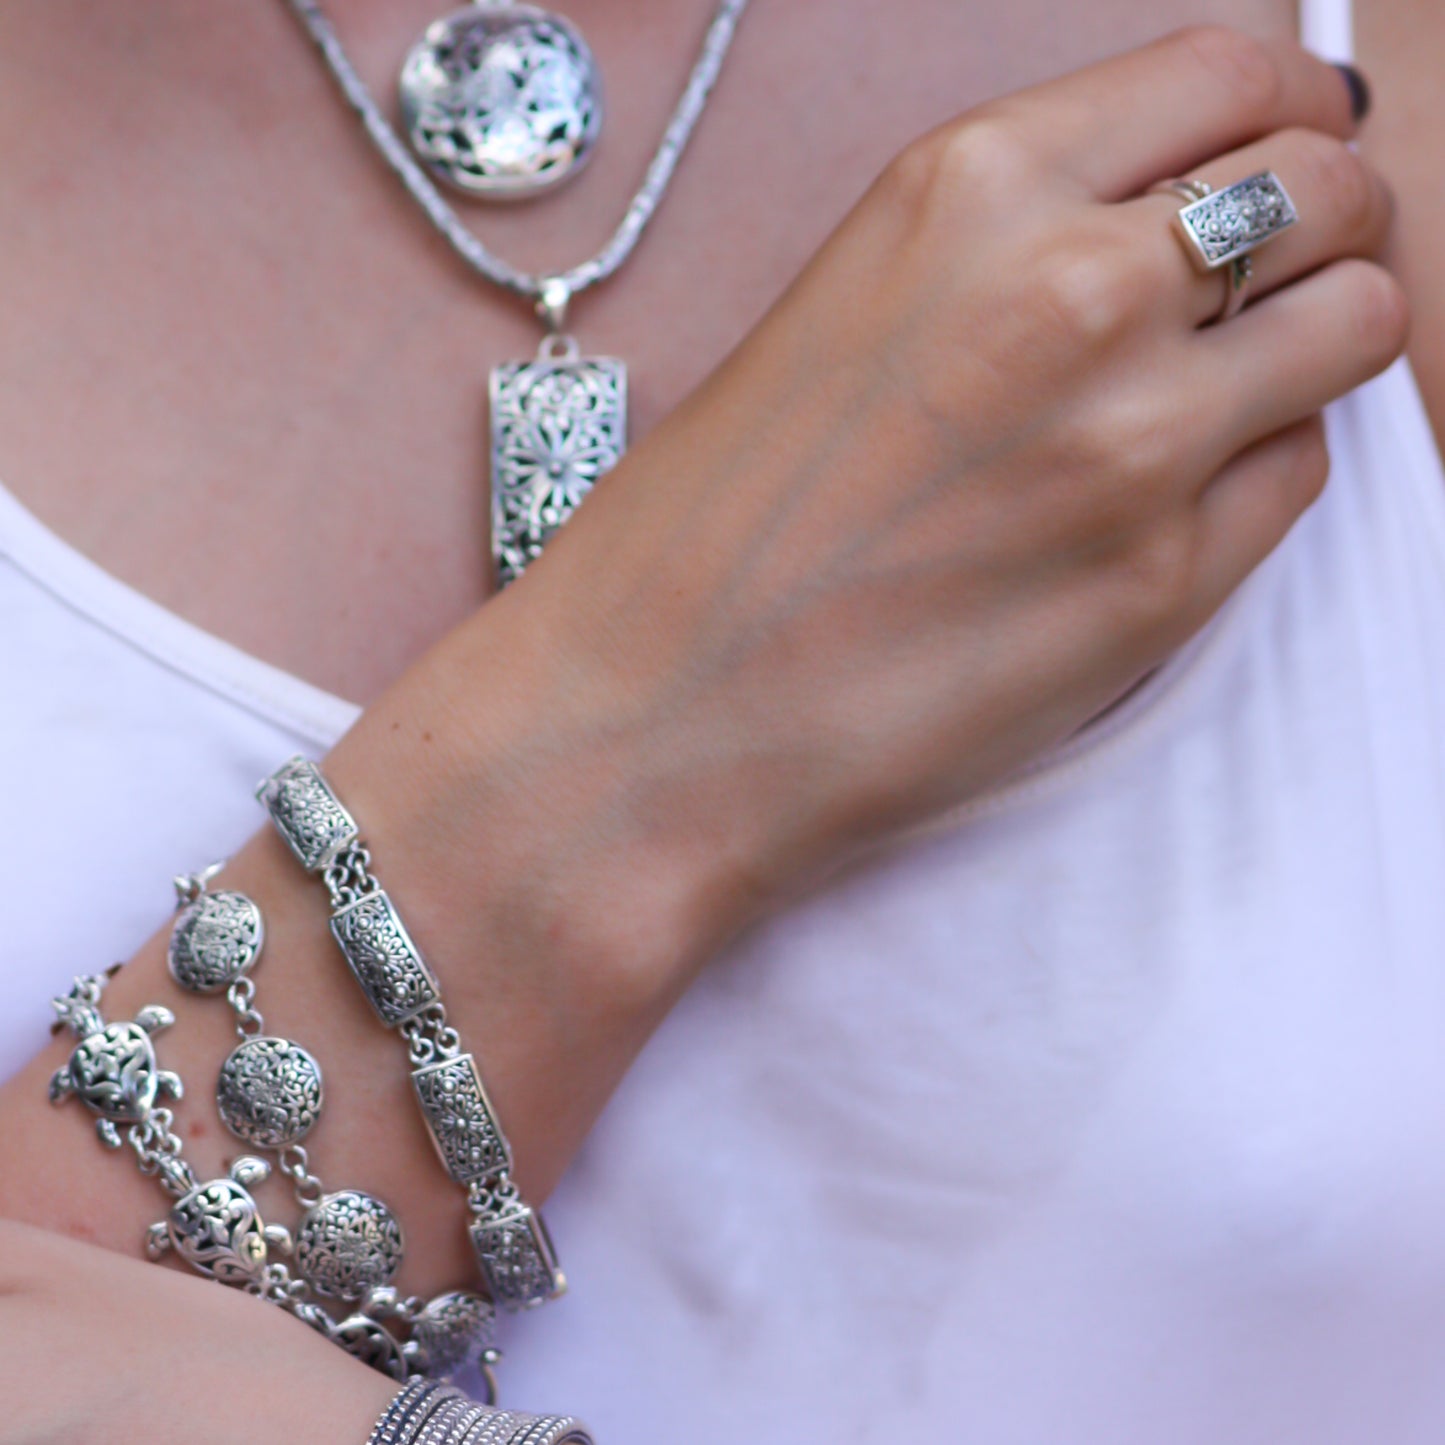 Woman wearing silver bracelets, necklaces and a ring.